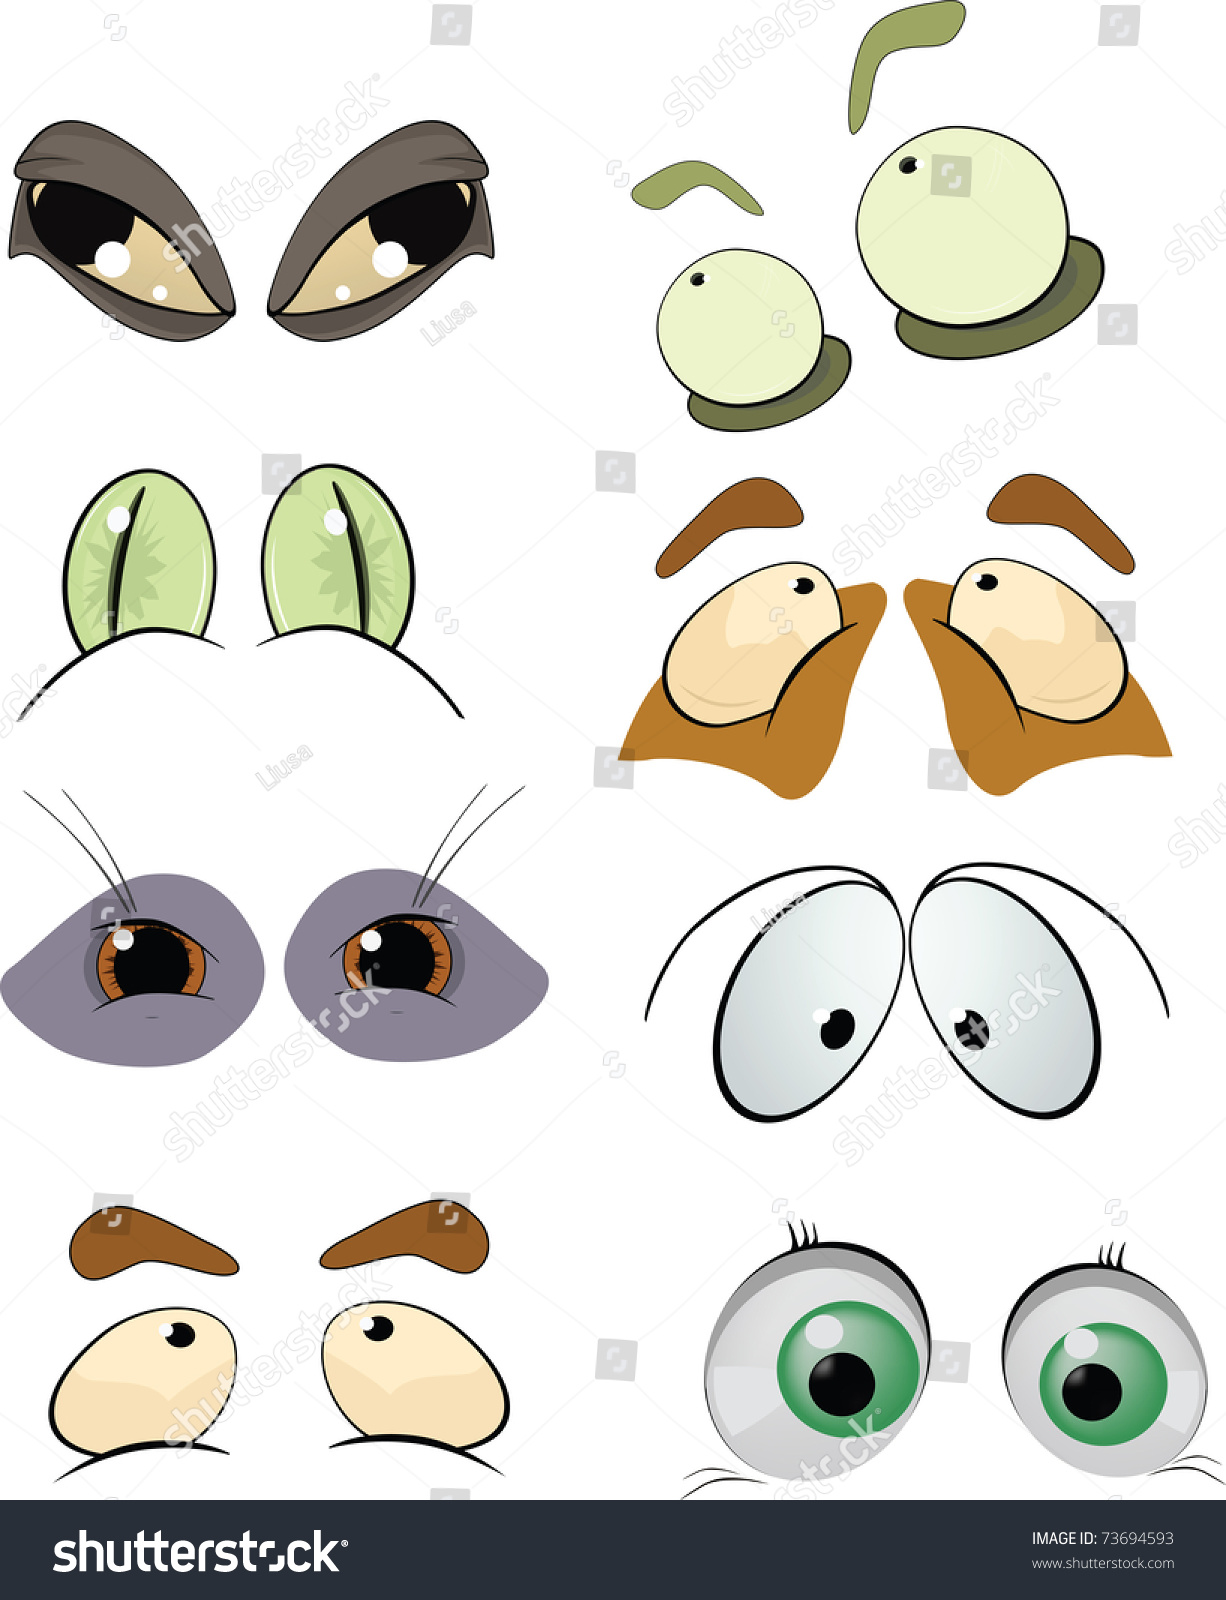 The Complete Set Of The Drawn Eyes. Cartoon Stock Photo 73694593